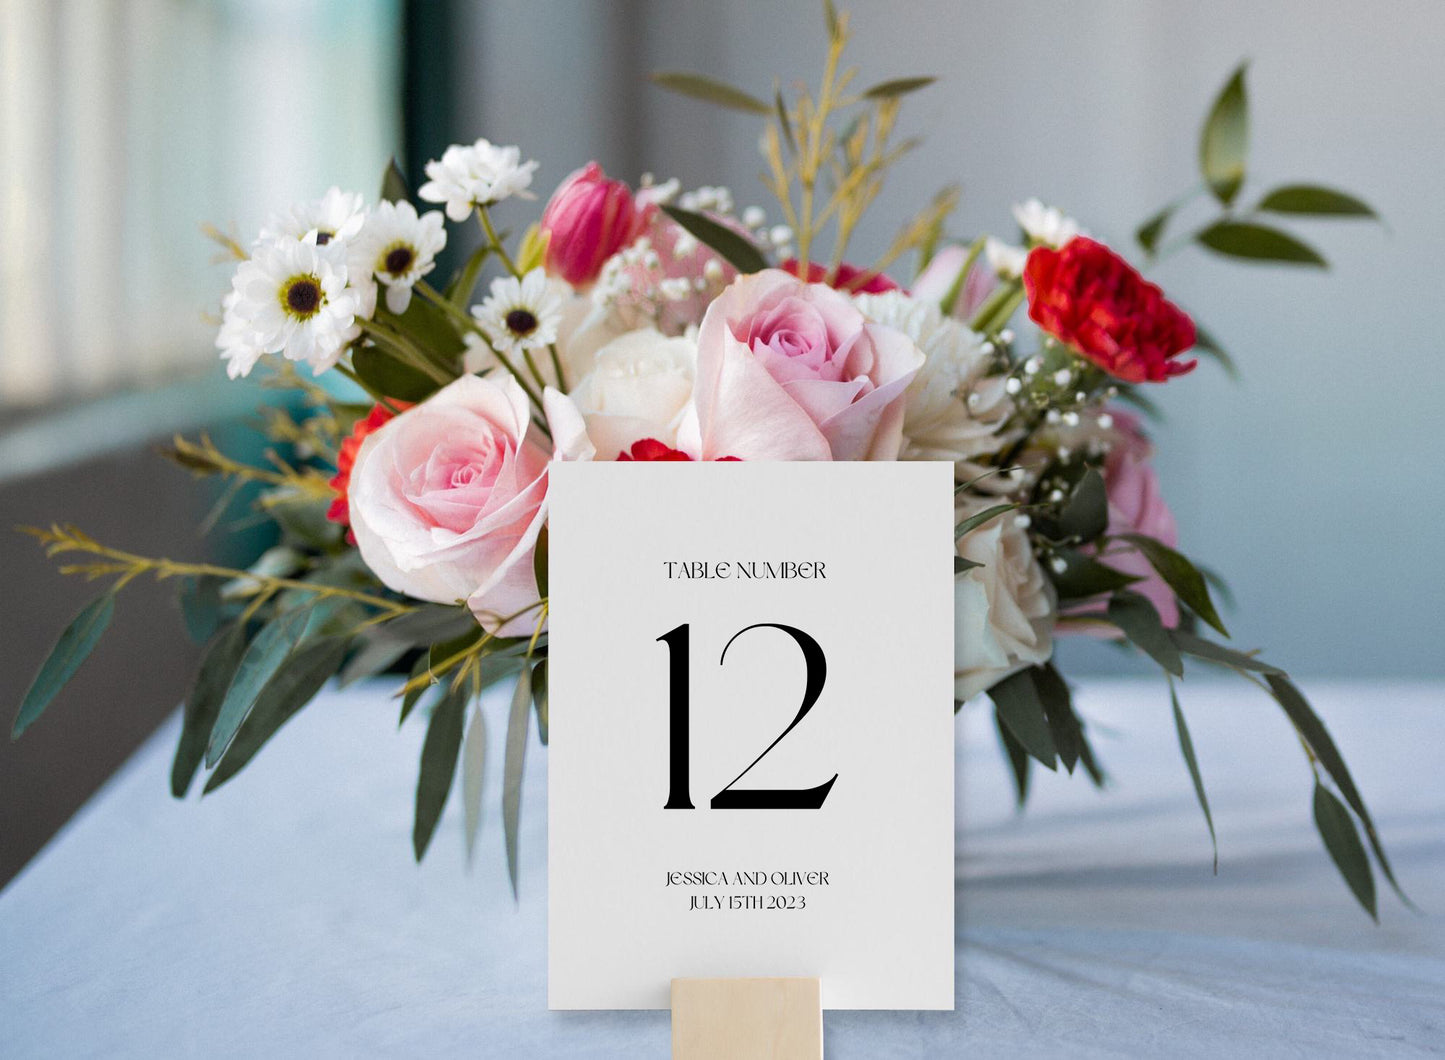 Wedding Table Numbers, Wedding Table Cards, Double Sided Table Number Cards, Table Name Cards,